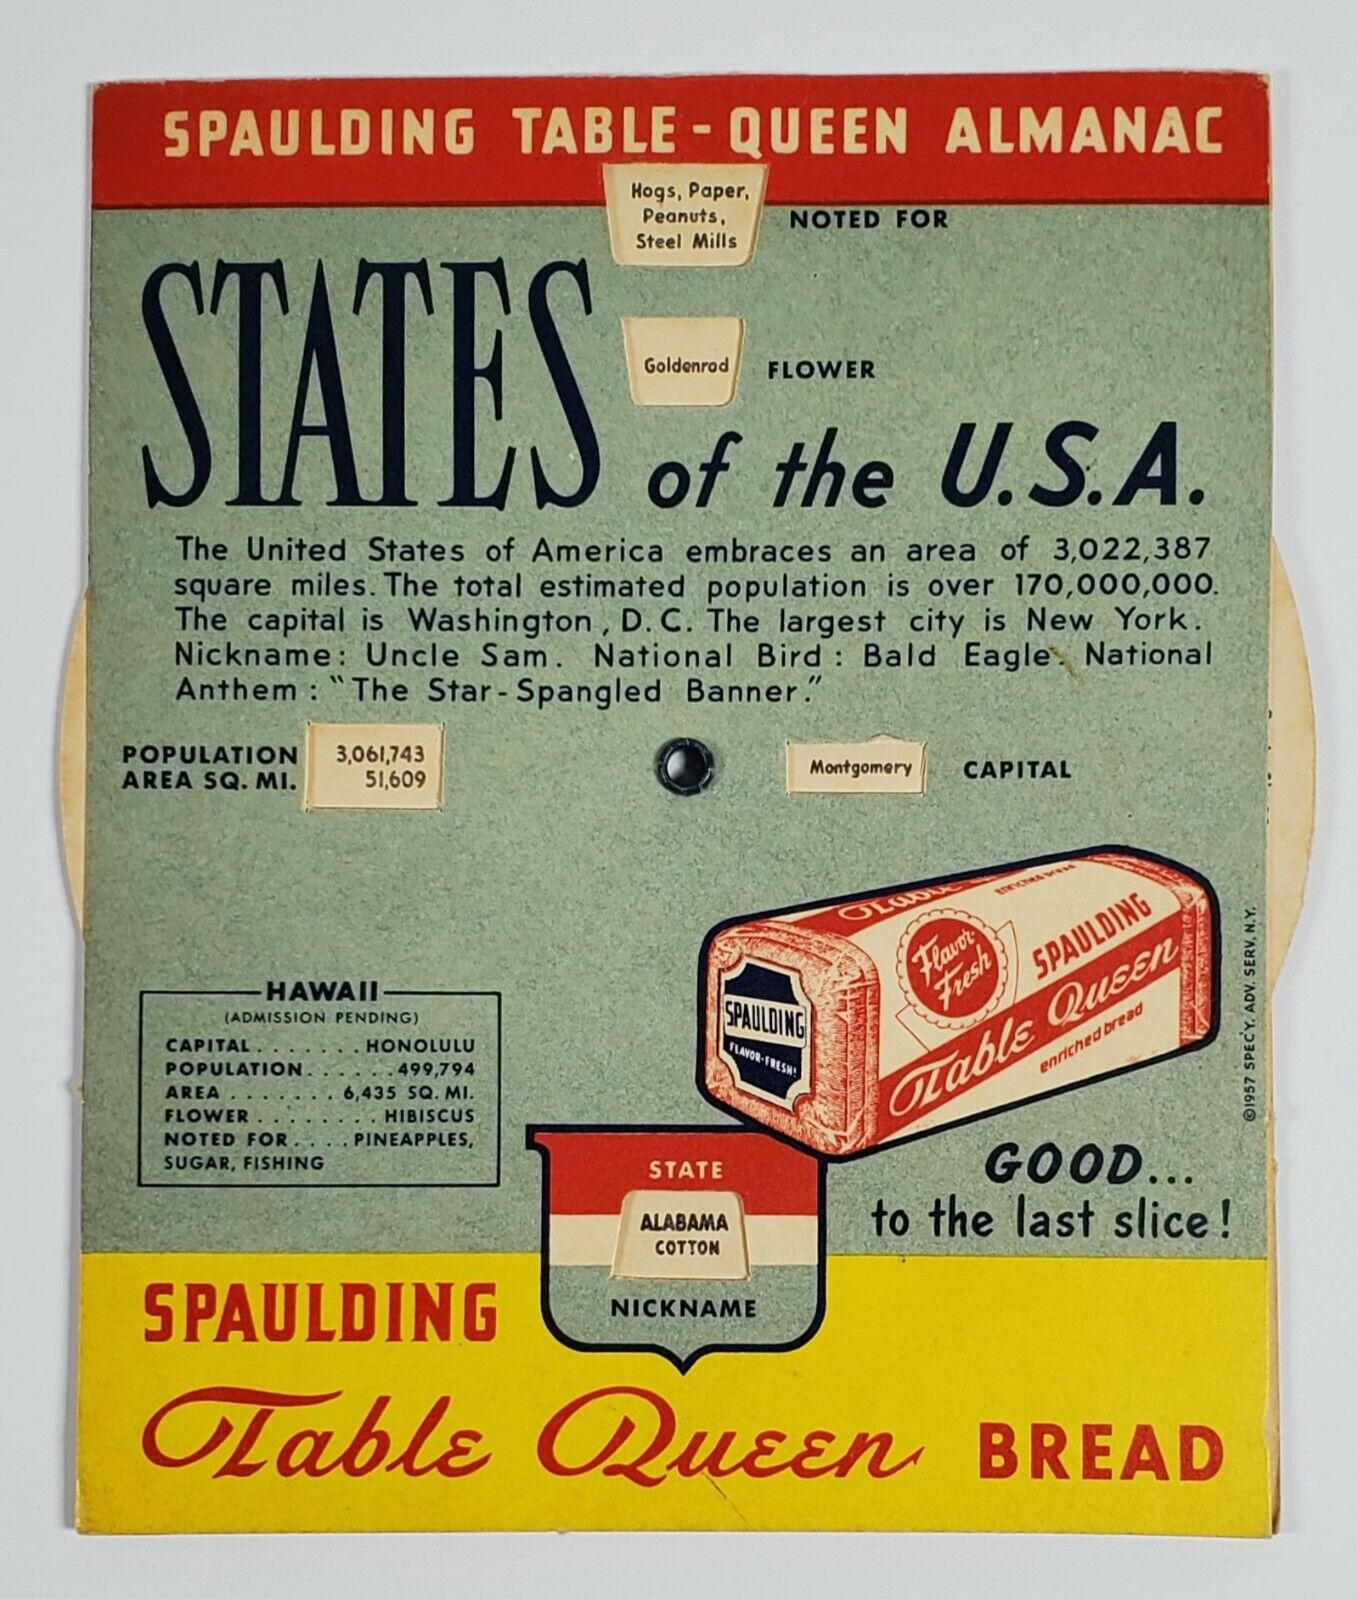 Spaulding Table Queen Bread States of the USA  Advertising Dial Almanac 1957